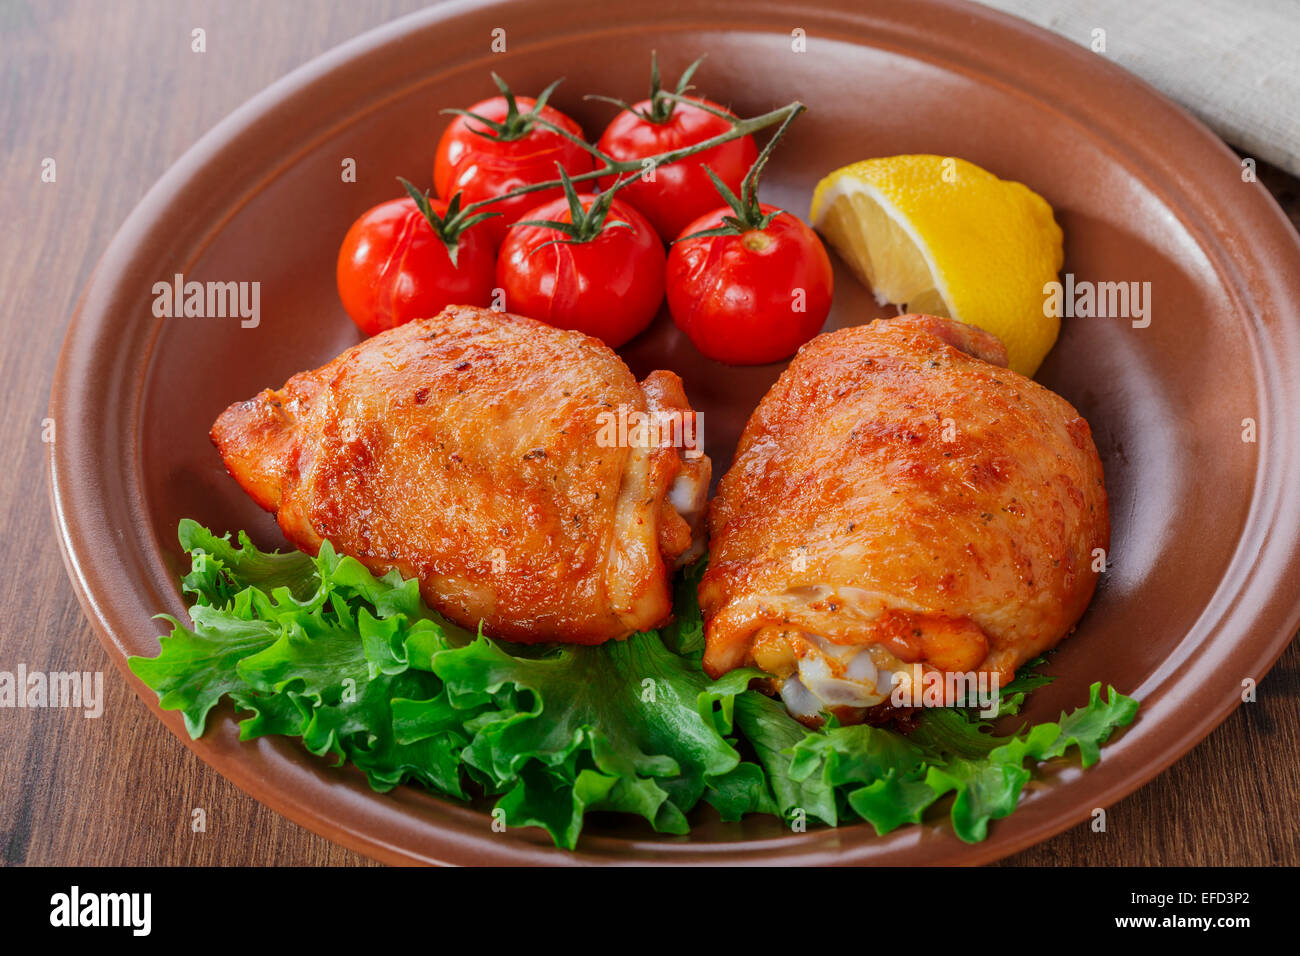 baked chicken thigh with cherry tomatoes and lemon Stock Photo